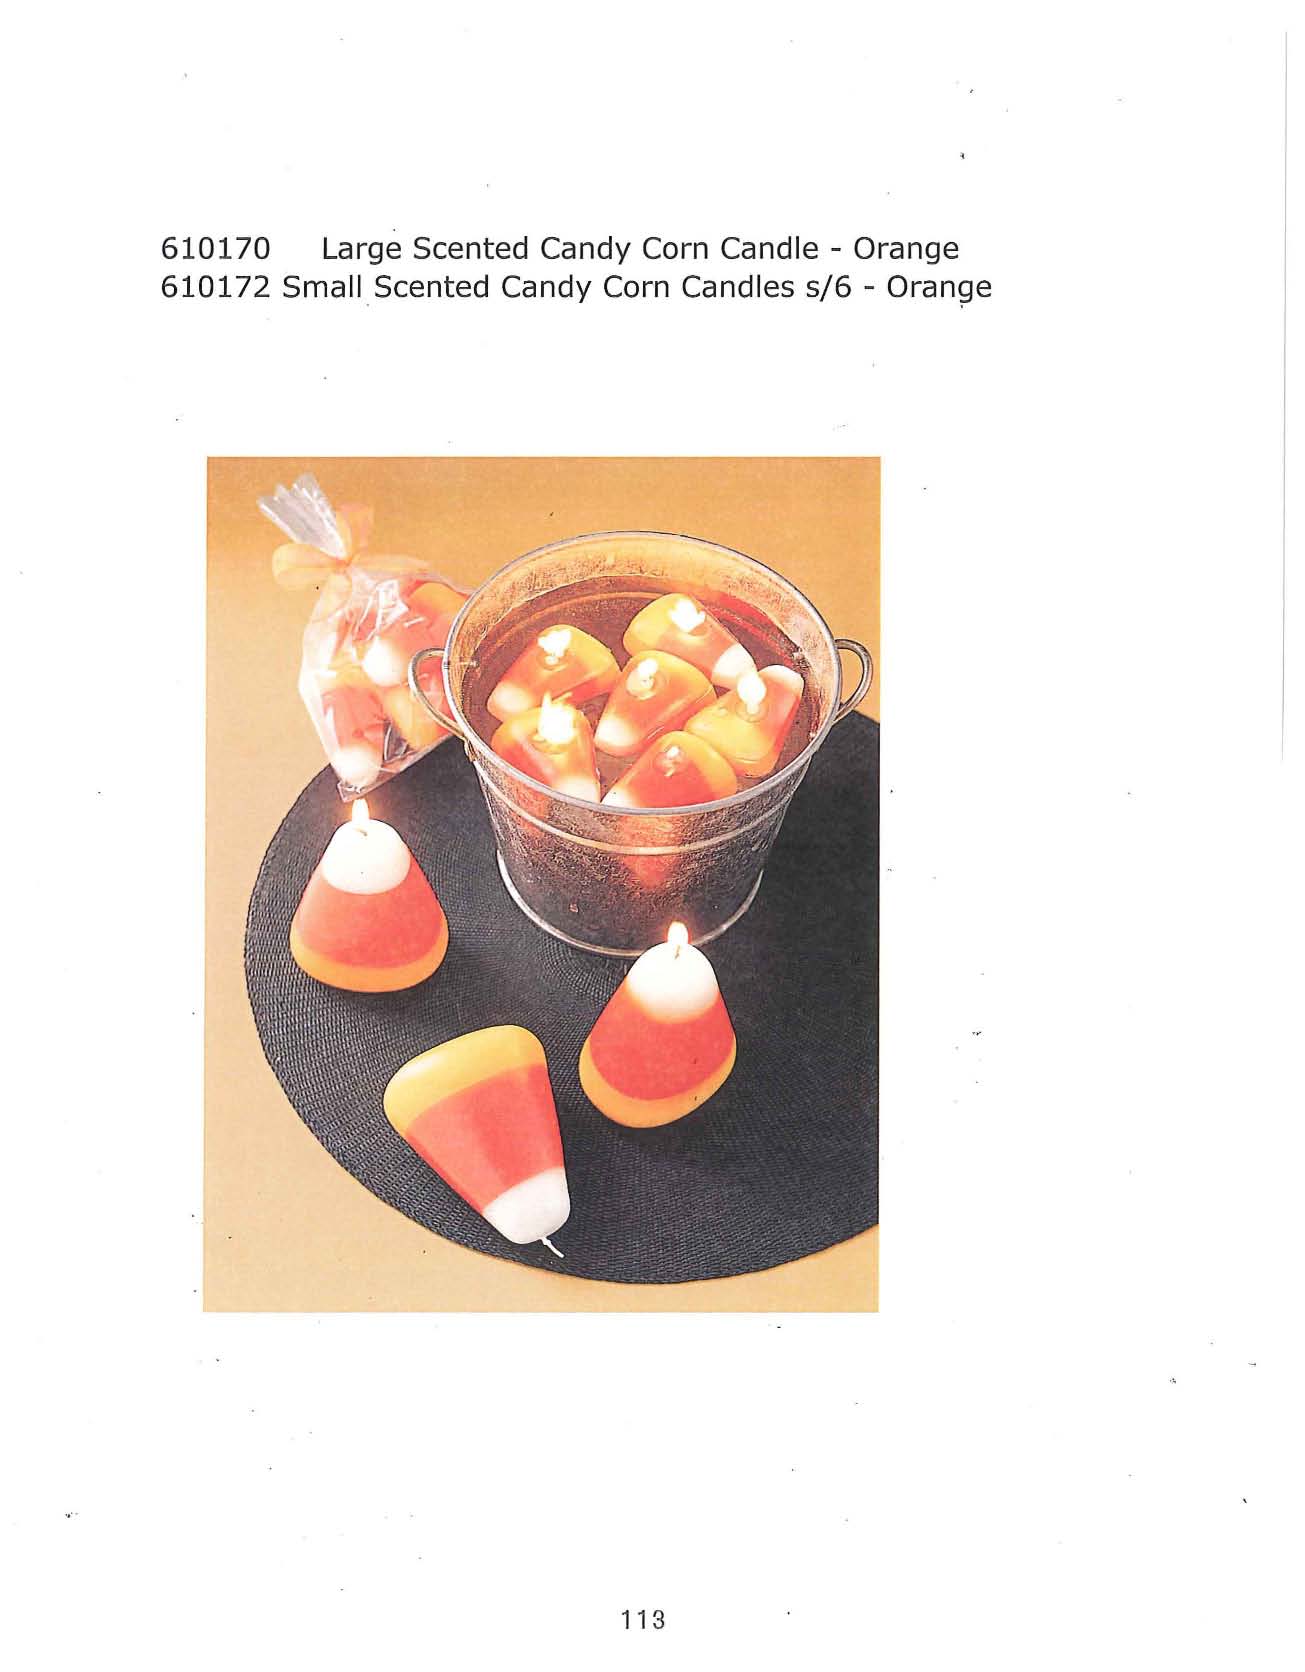 Large and Small s/6 Scented Candy Corn Candle - Orange